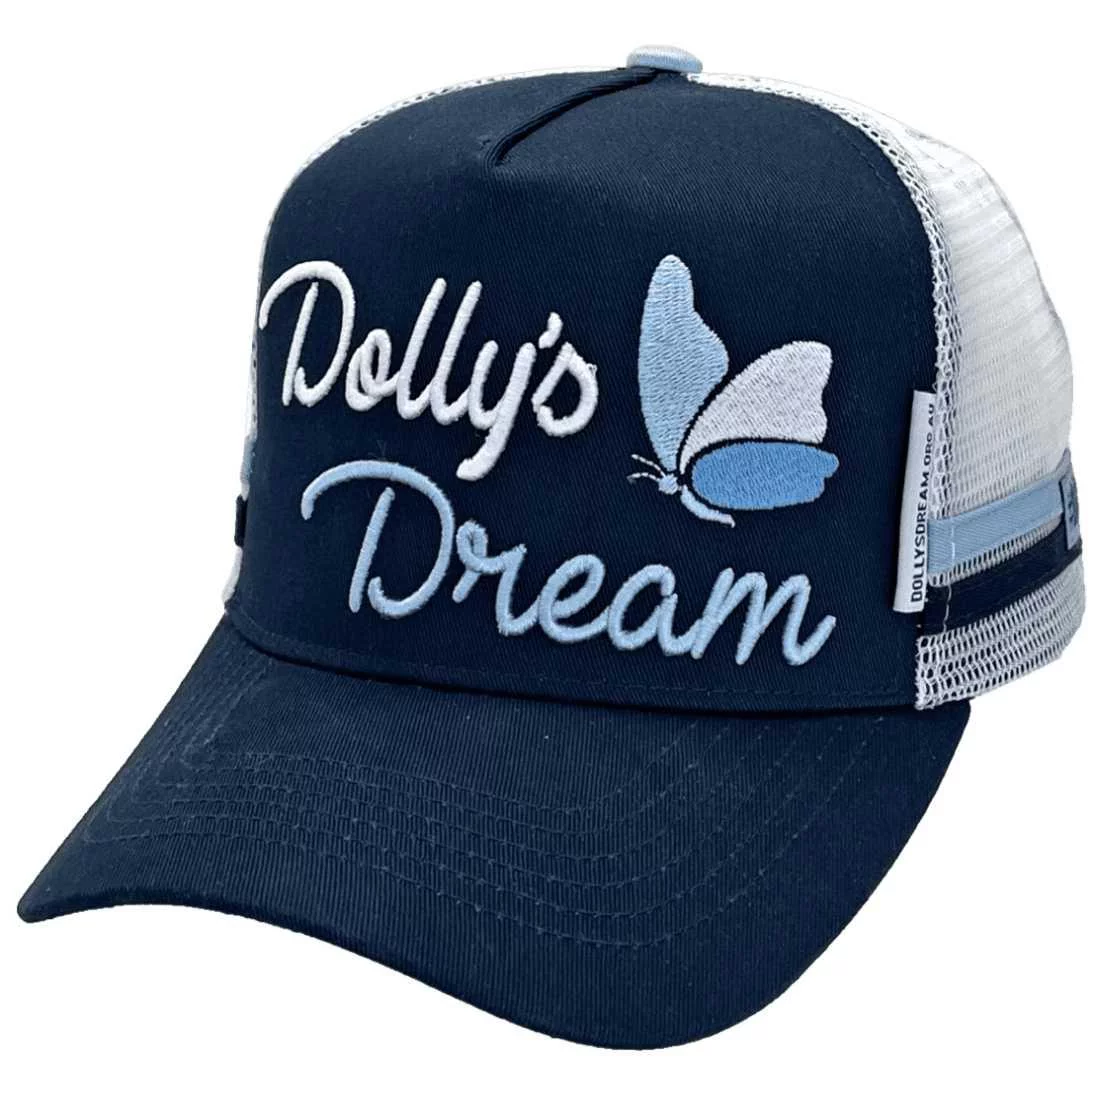 Dolly's Dream Foundation #doitfordolly HP Midrange Aussie Trucker Hat with Australian Head Fit Crown and 2 Side Bands Navy White Blue